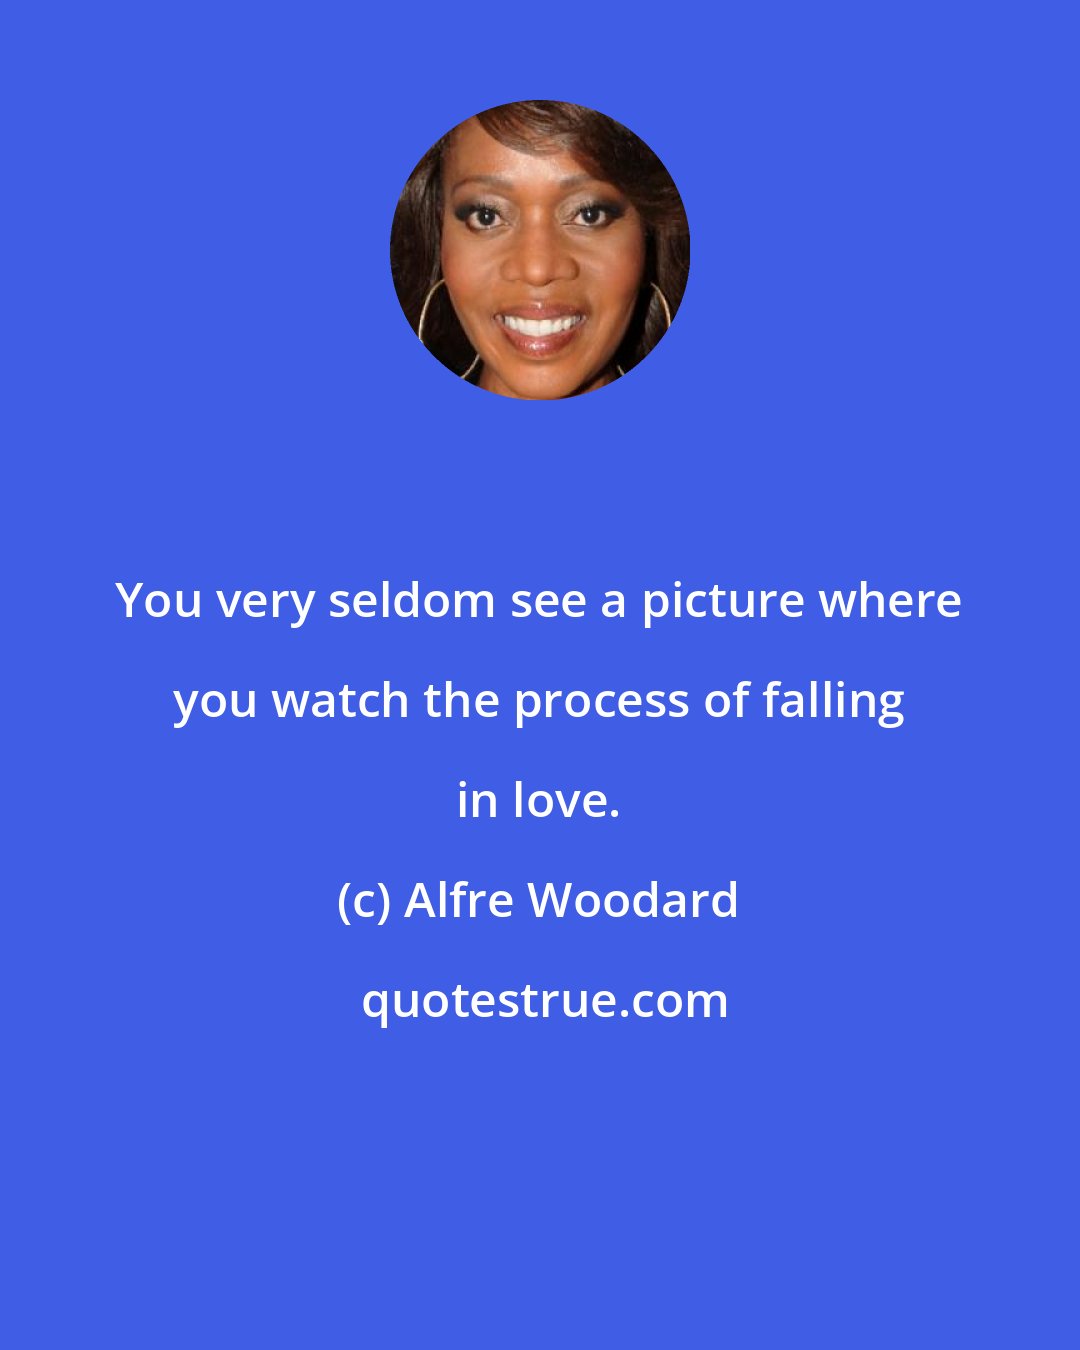 Alfre Woodard: You very seldom see a picture where you watch the process of falling in love.